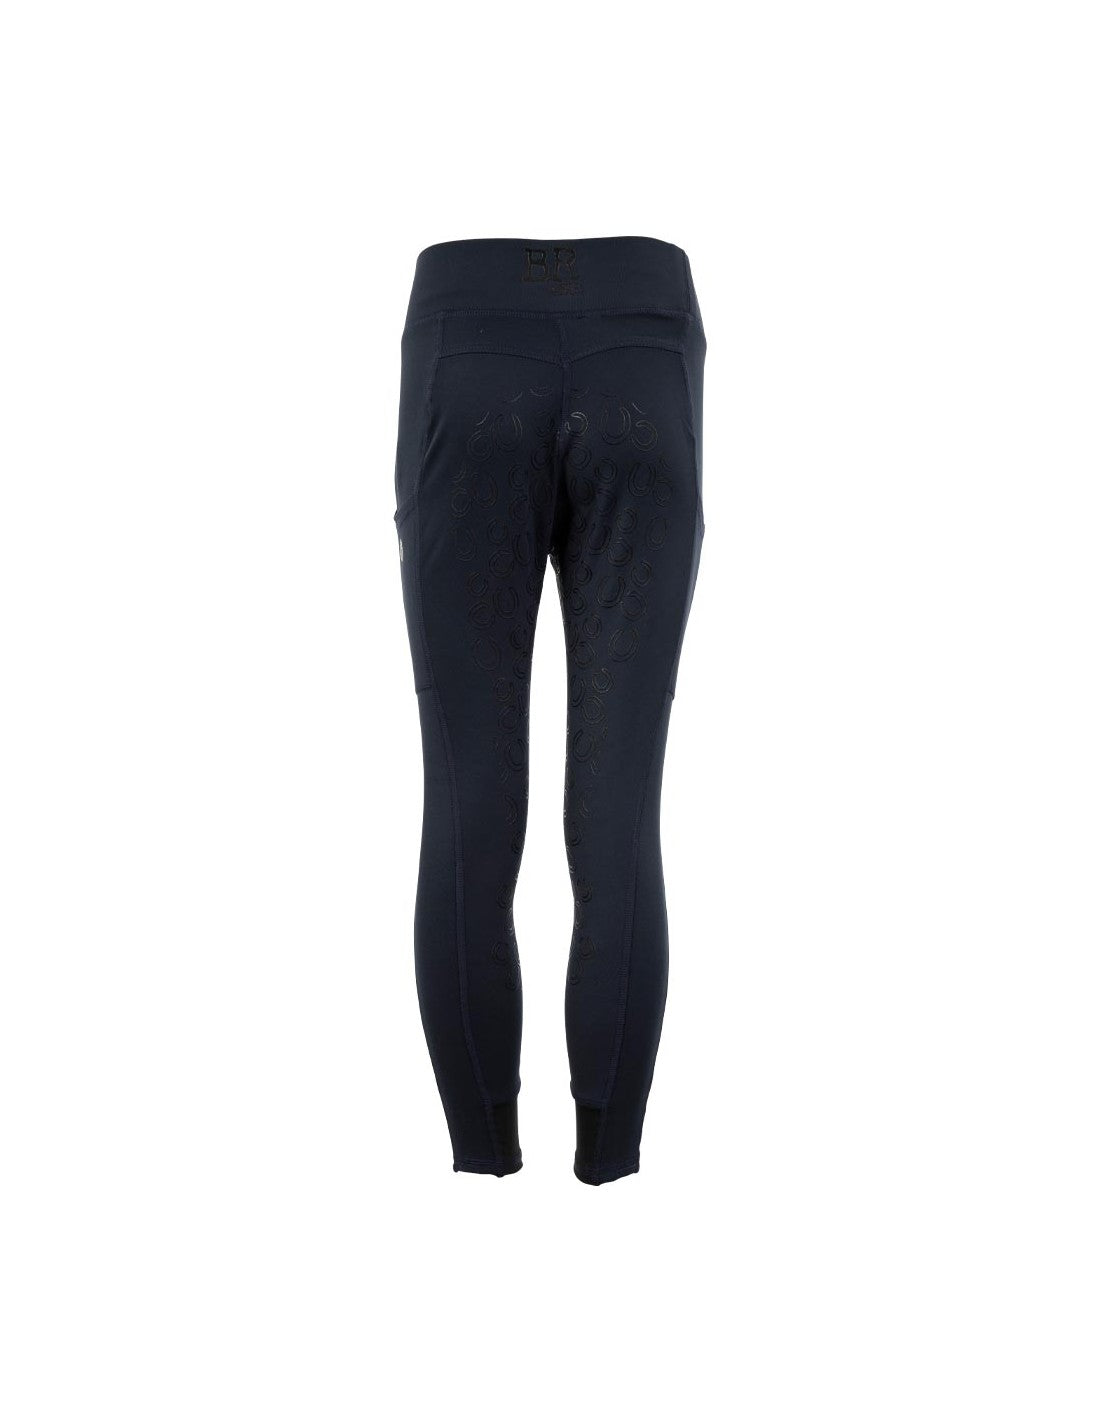 4-EH Treggin Ridetights - OUTLET